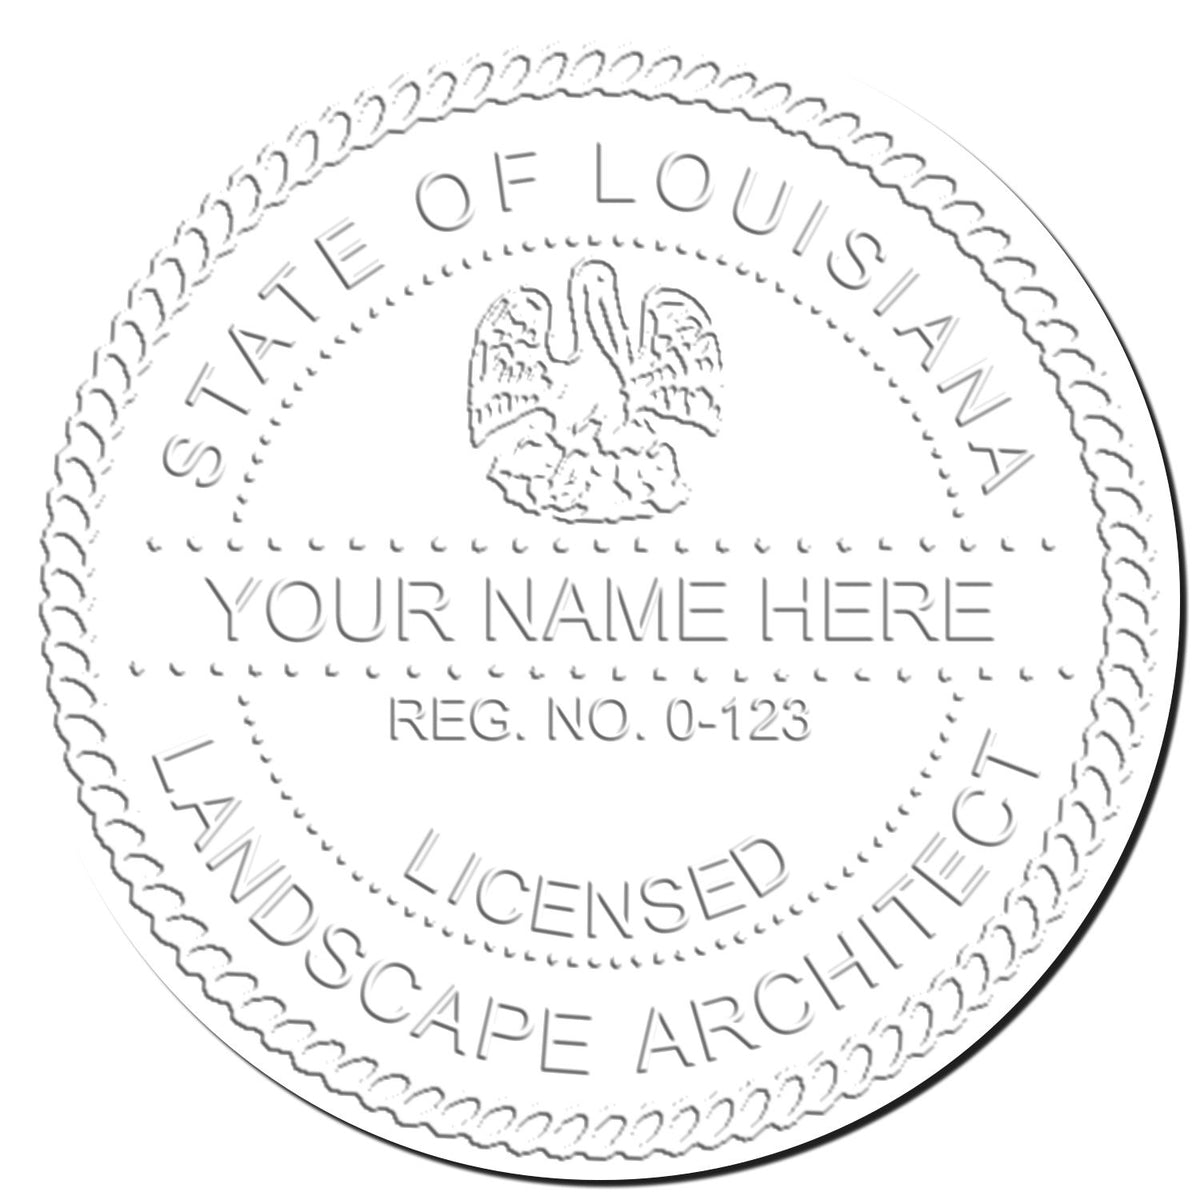 This paper is stamped with a sample imprint of the Gift Louisiana Landscape Architect Seal, signifying its quality and reliability.